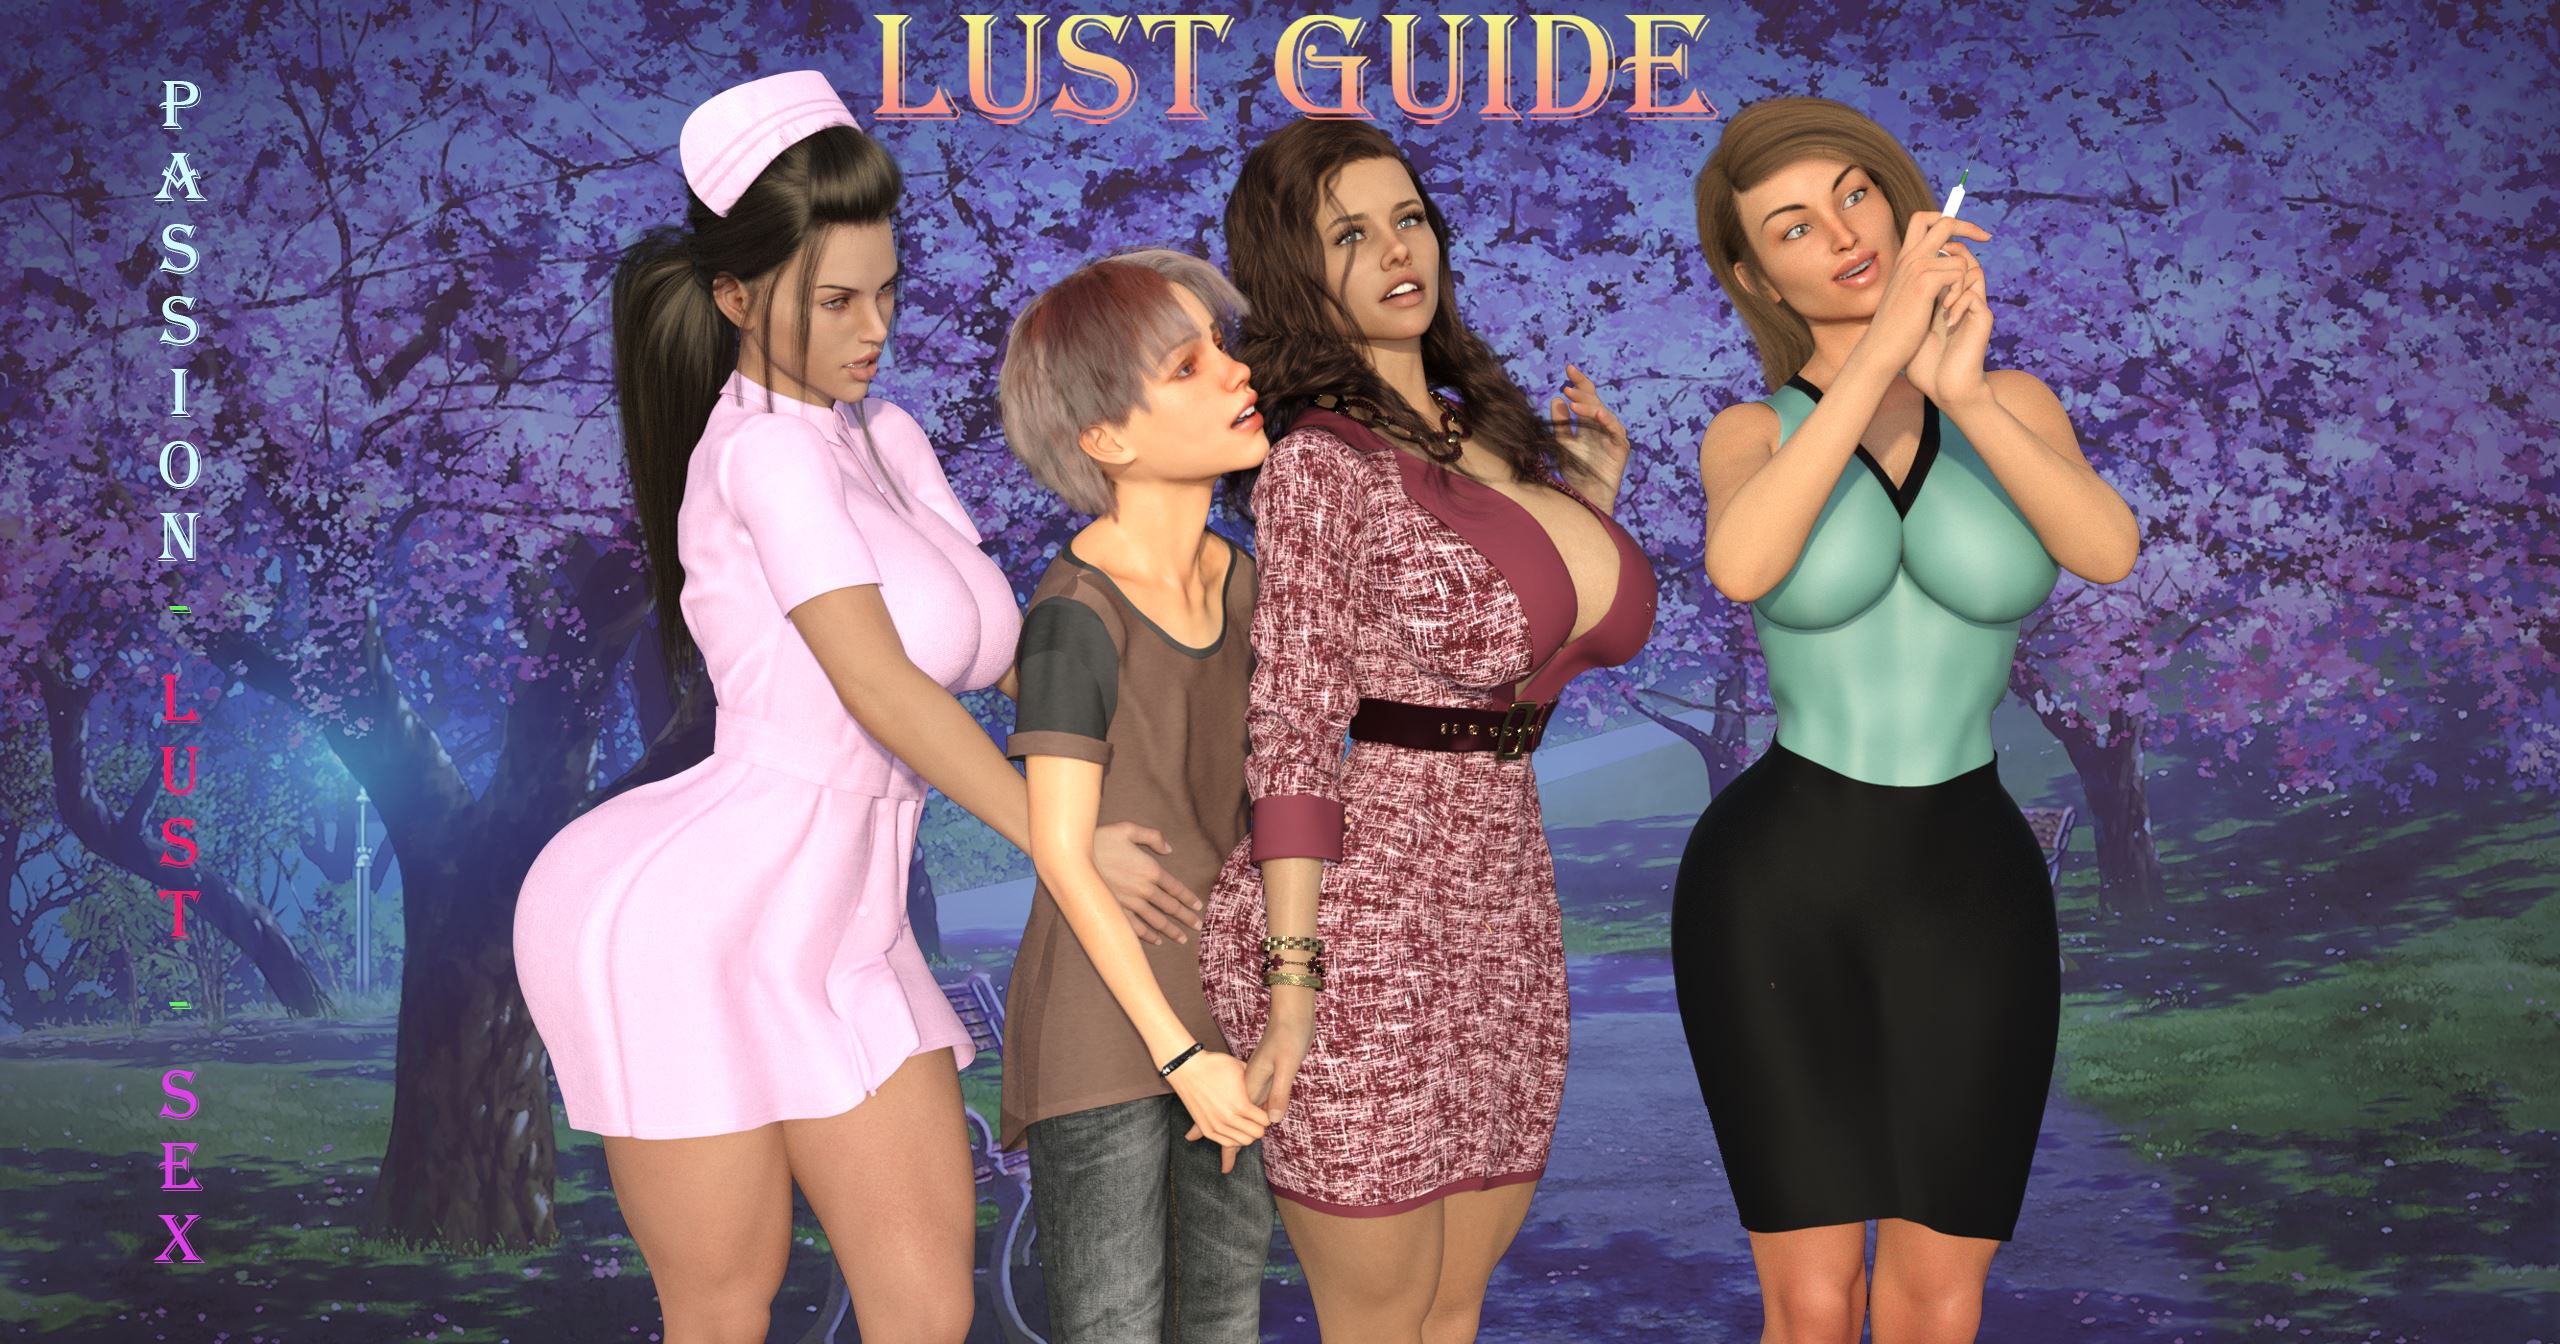 Lust Guide porn xxx game download cover